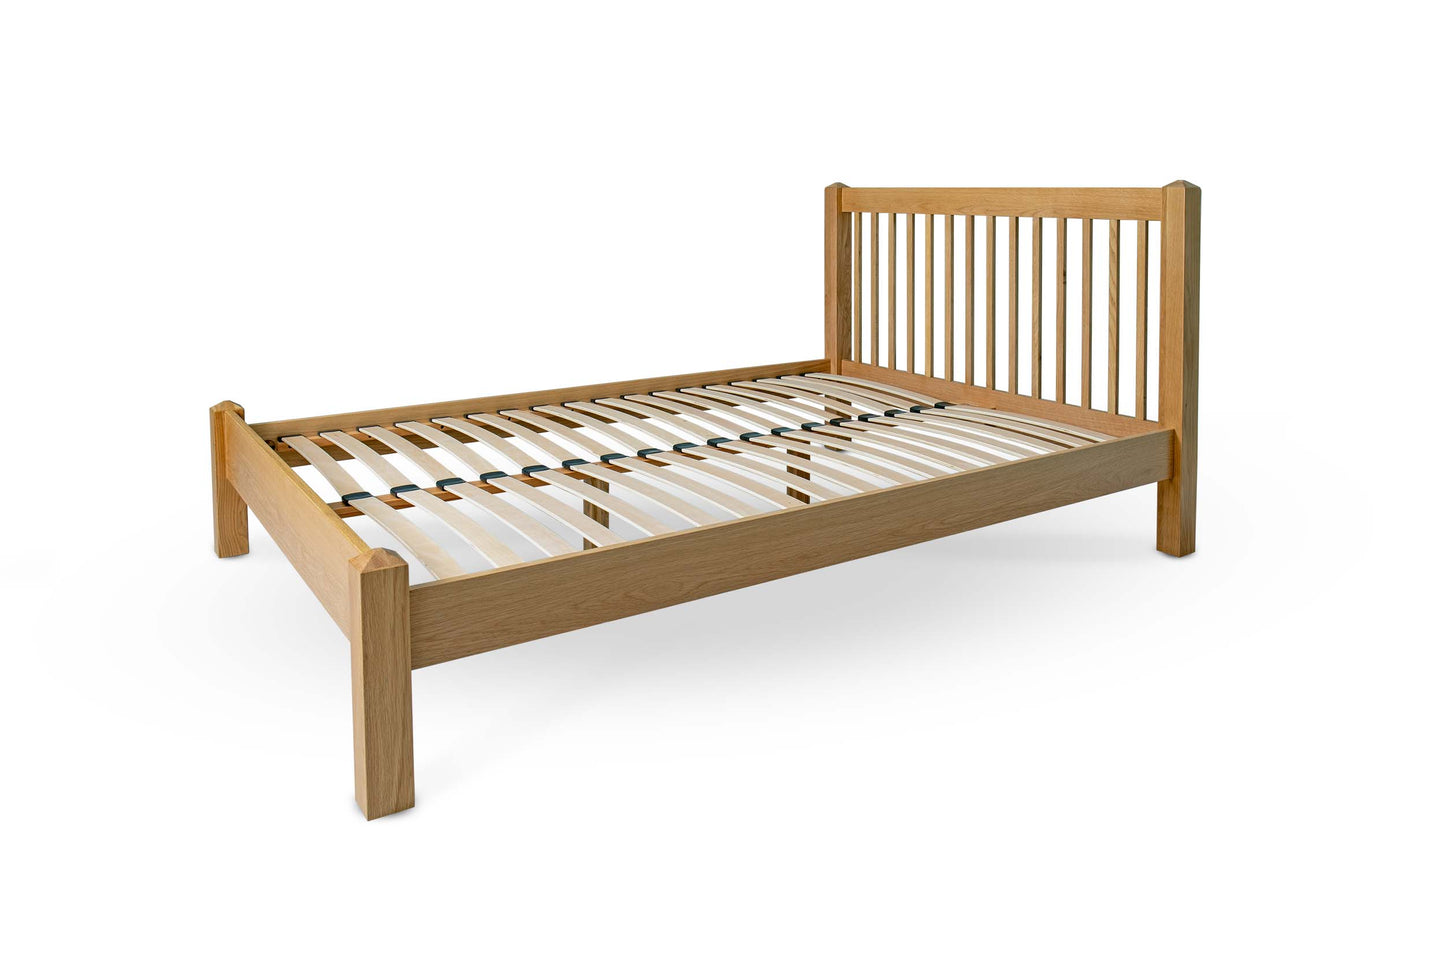 Thornton Bed Frame - 4ft Small Double - Natural Oak